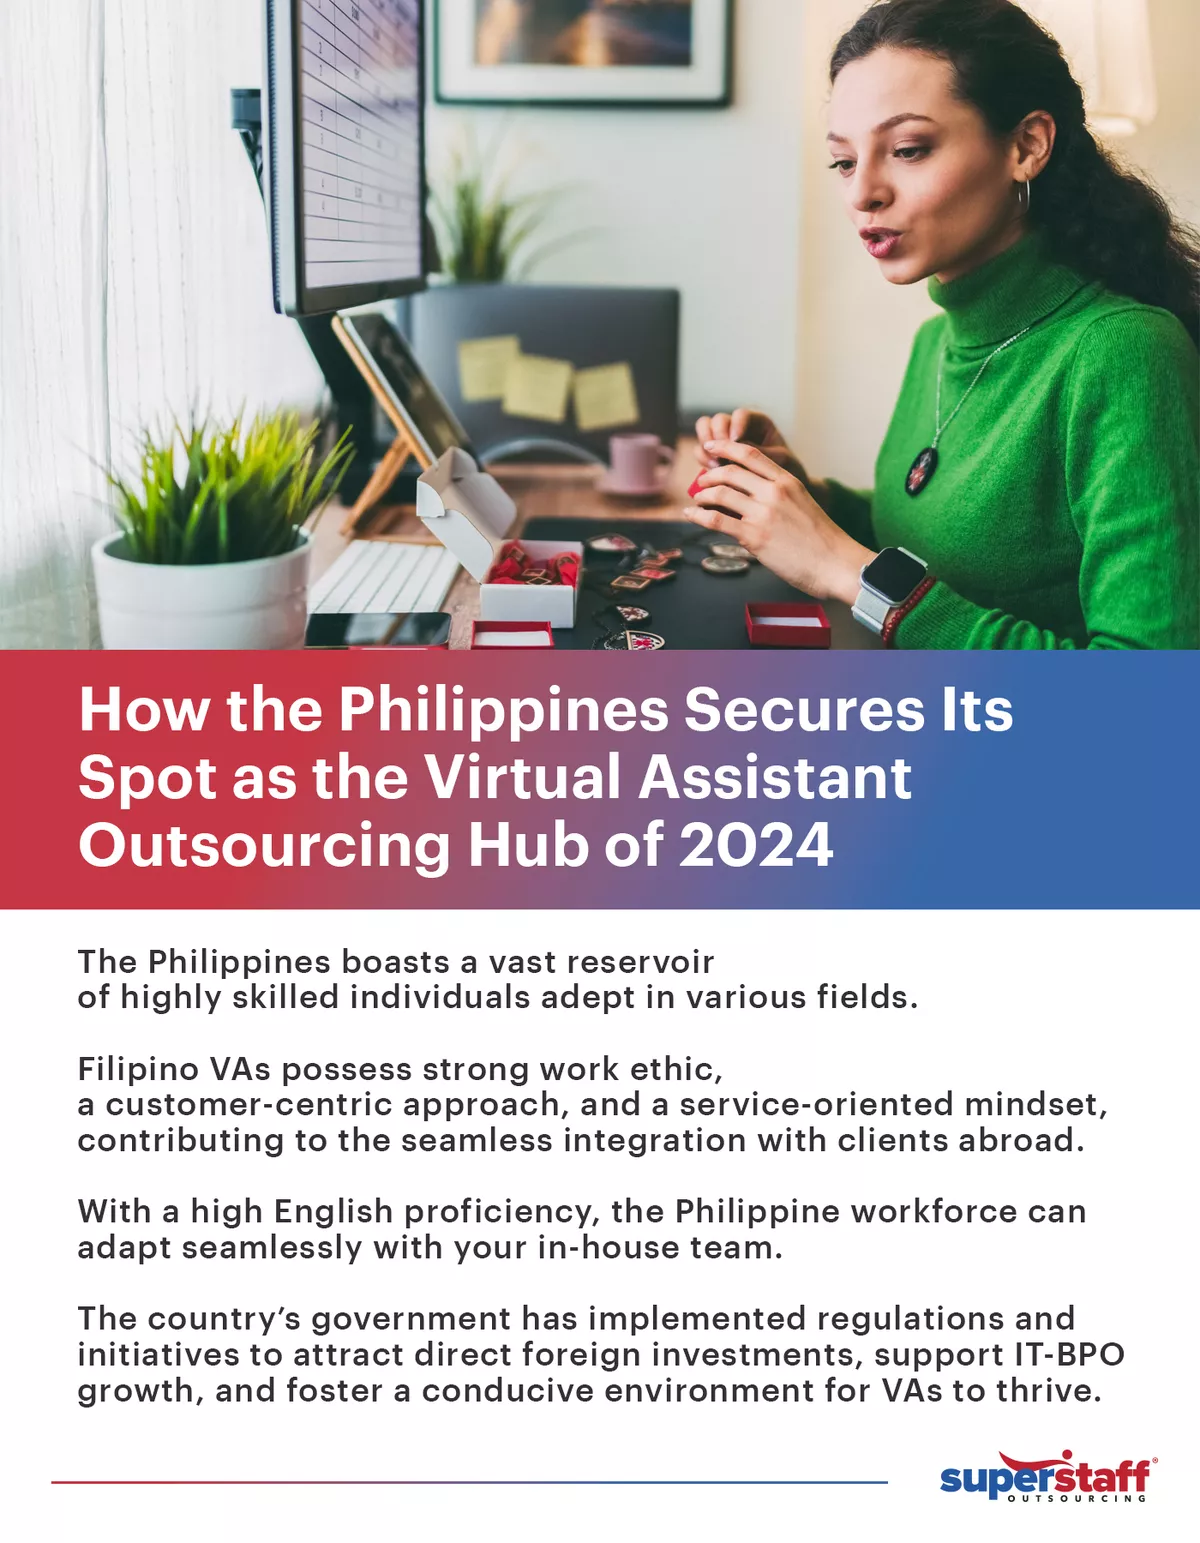 An infographic showing why the Philippines is the unofficial best country for outsourcing virtual assistants.